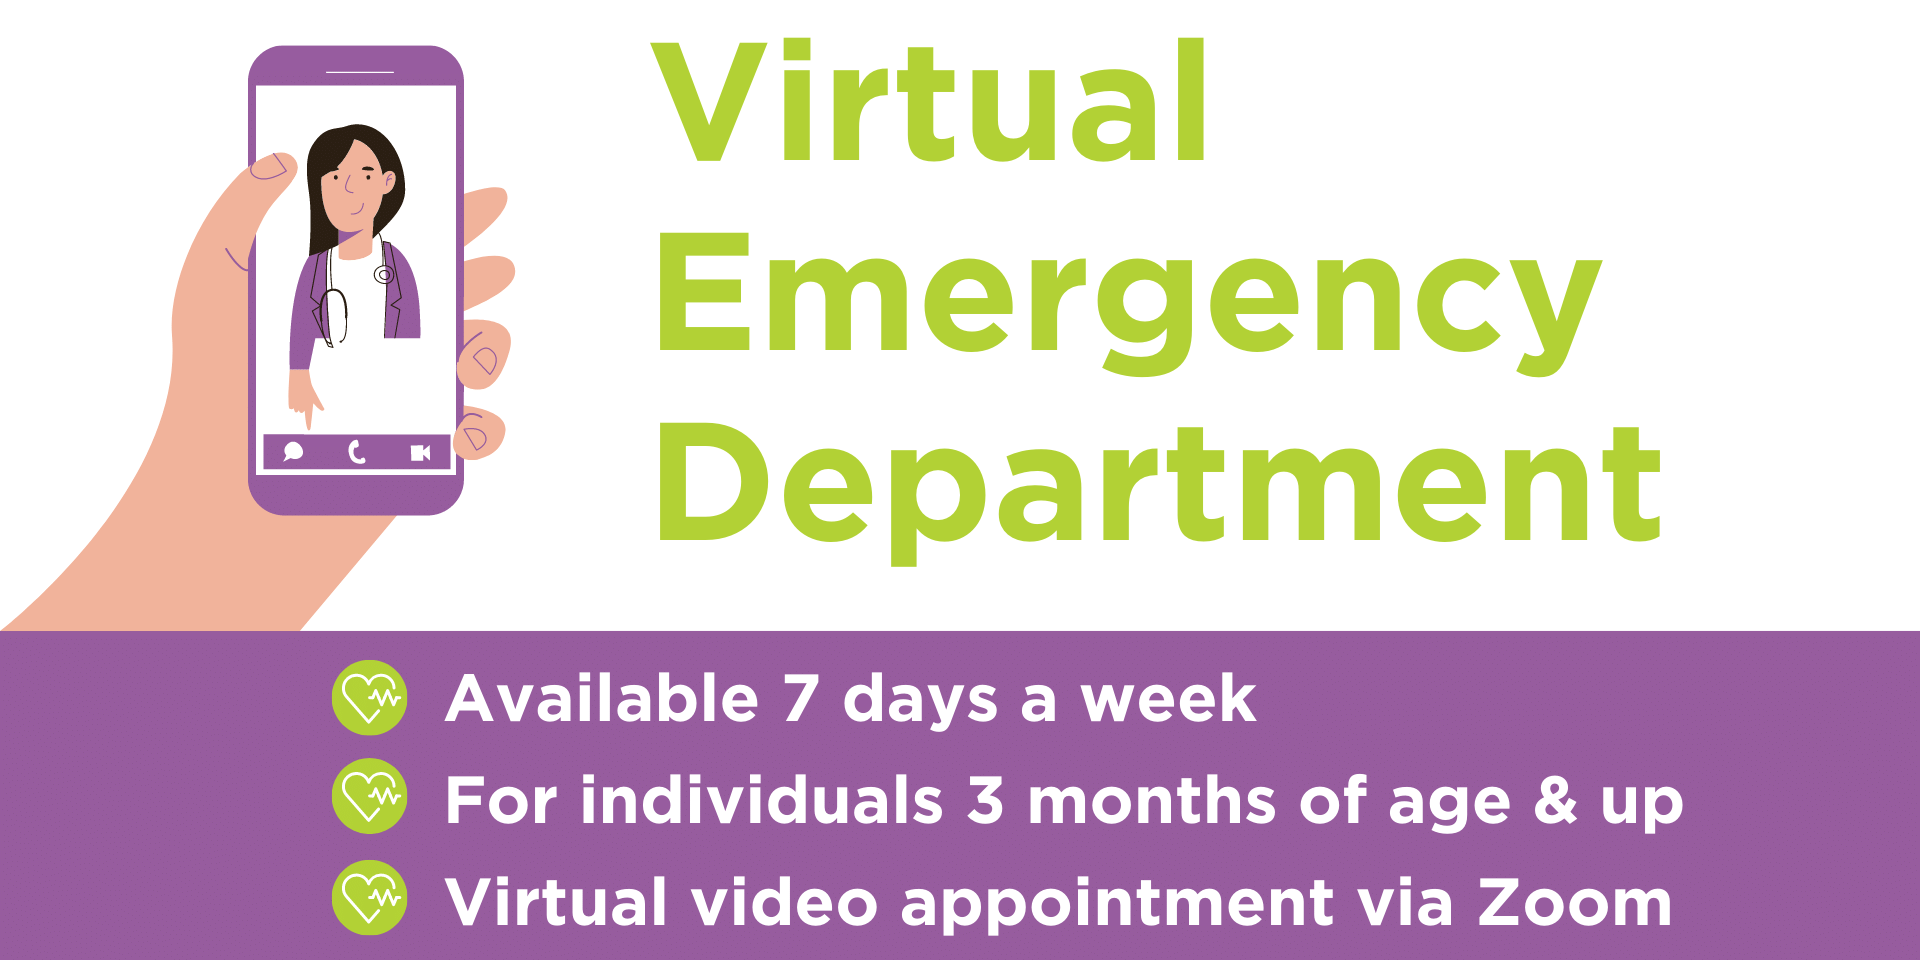 Virtual Emergency Department. Available 7 days a week, for individuals 3 months of age and up, virtual video appointments via Zoom